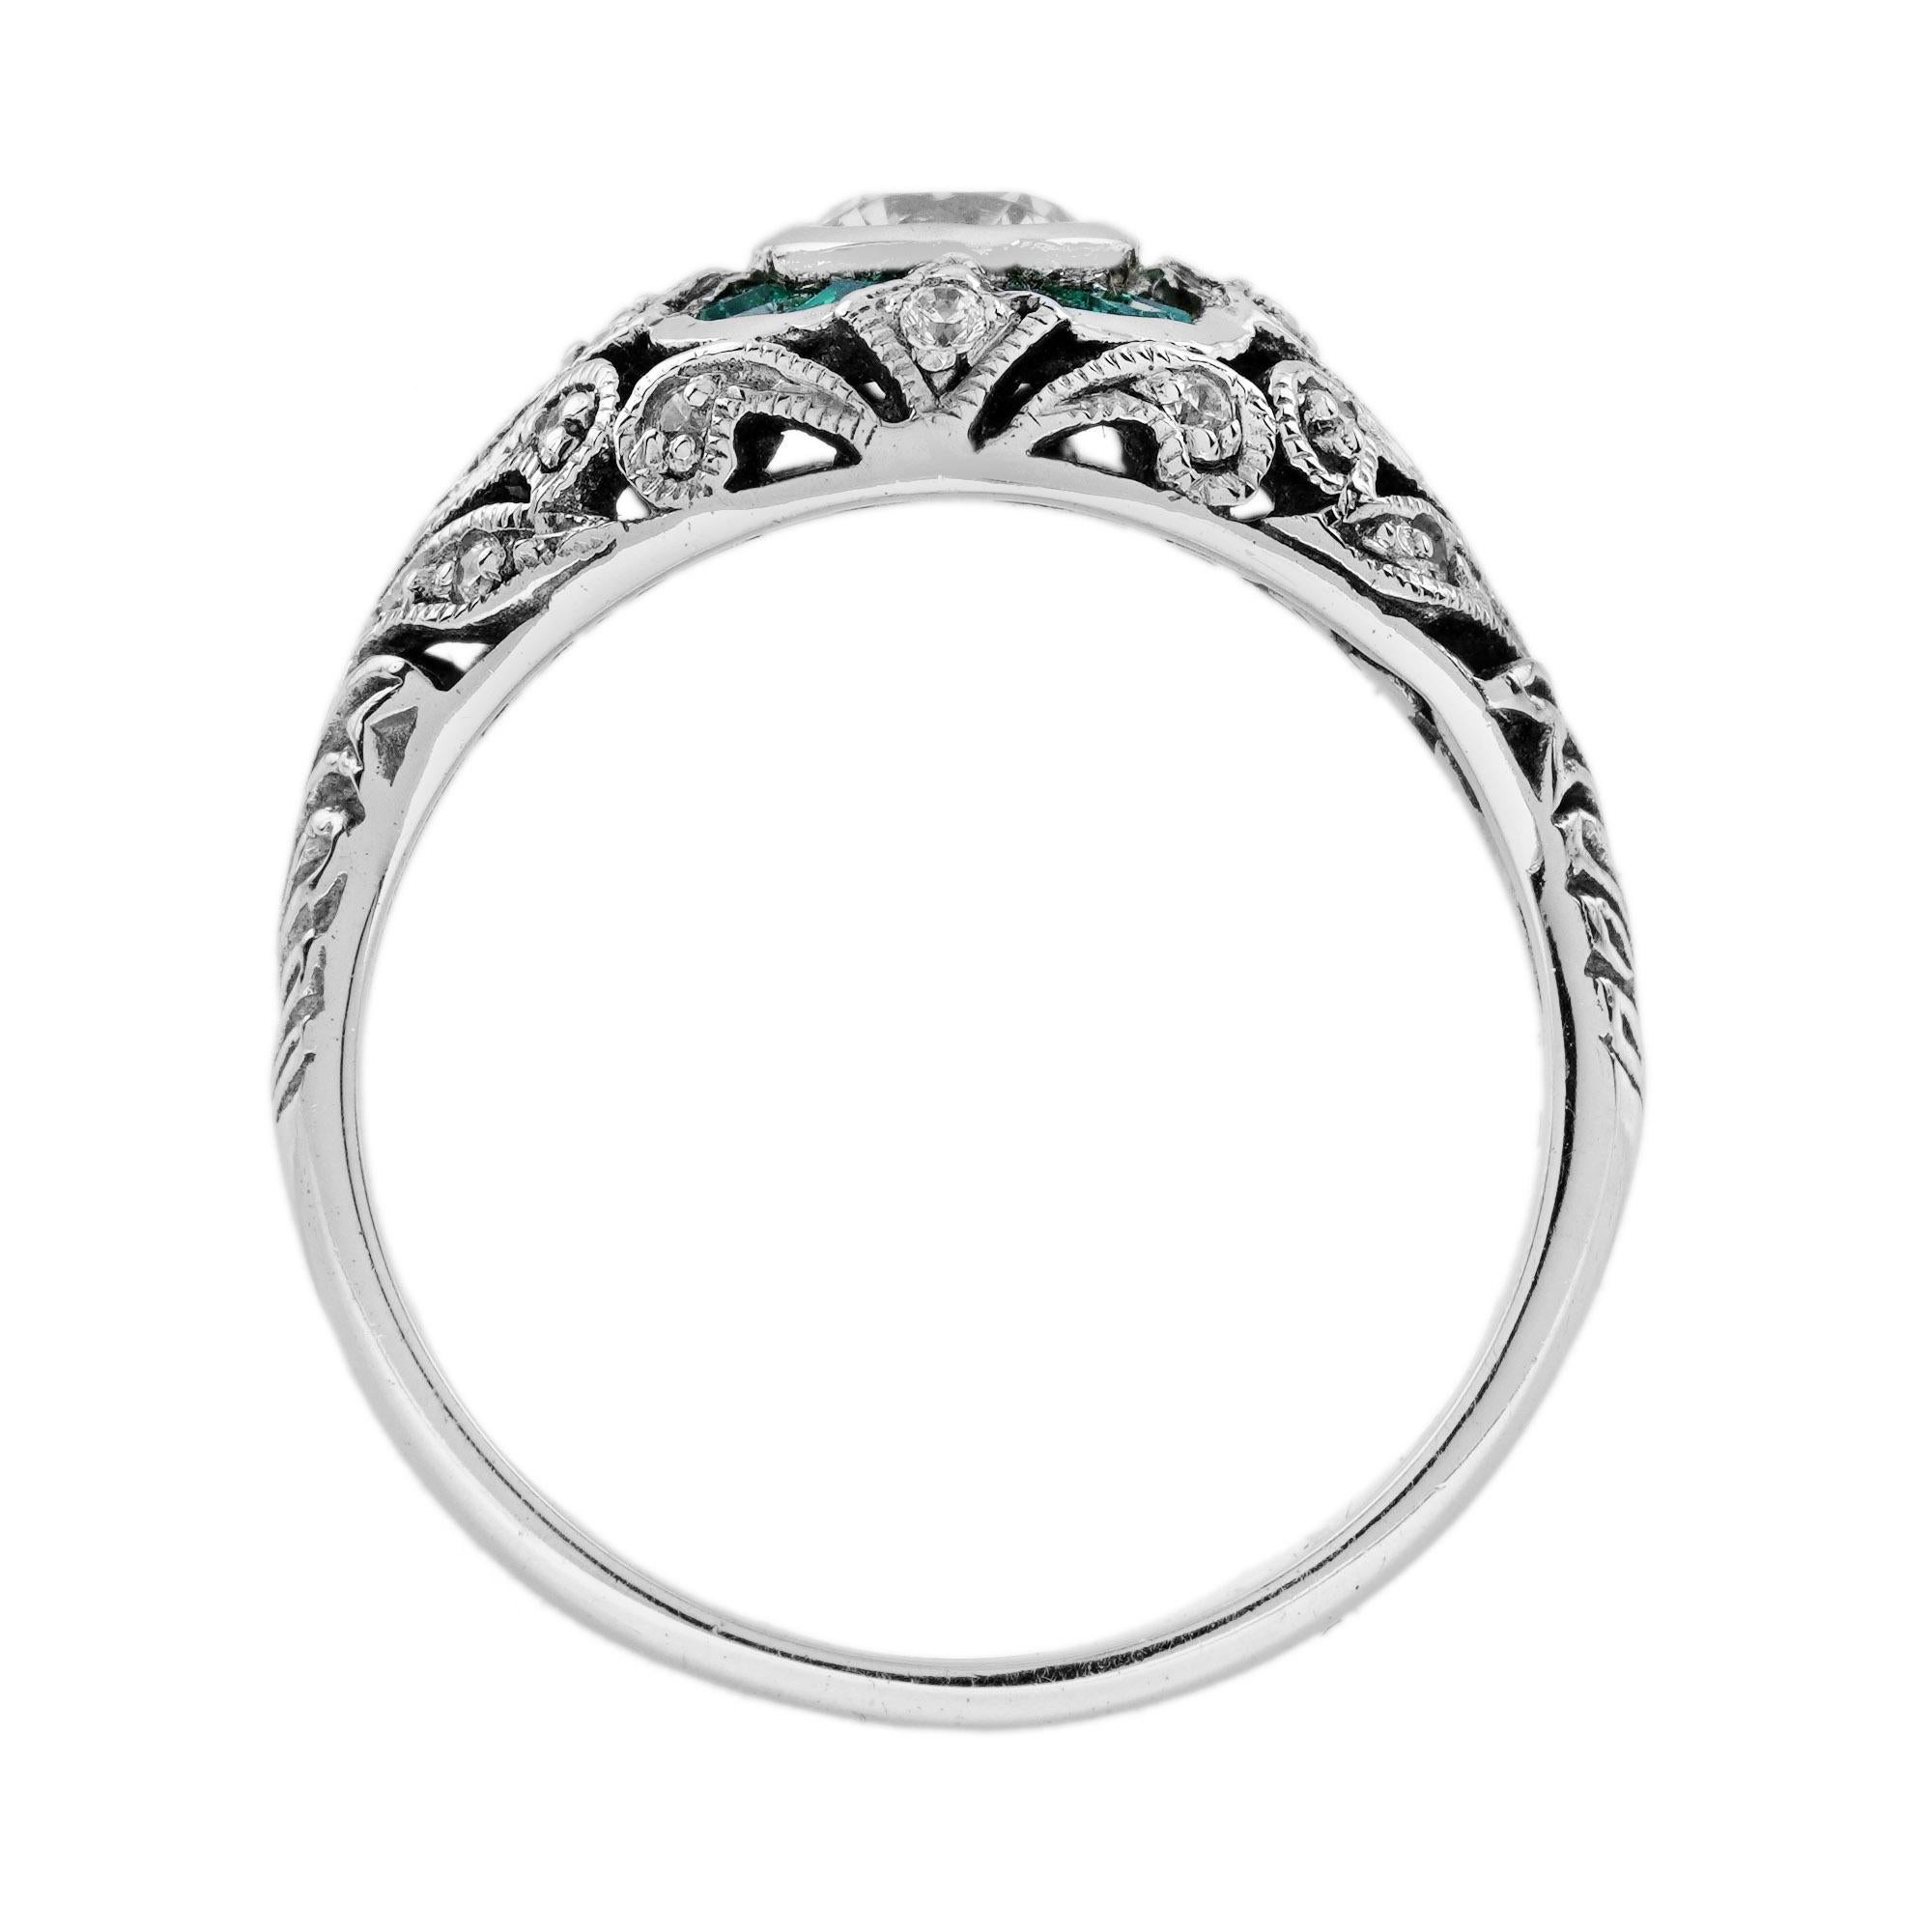 Diamond and Emerald Art Deco Style Floral Engraved Ring in 18K White Gold For Sale 1